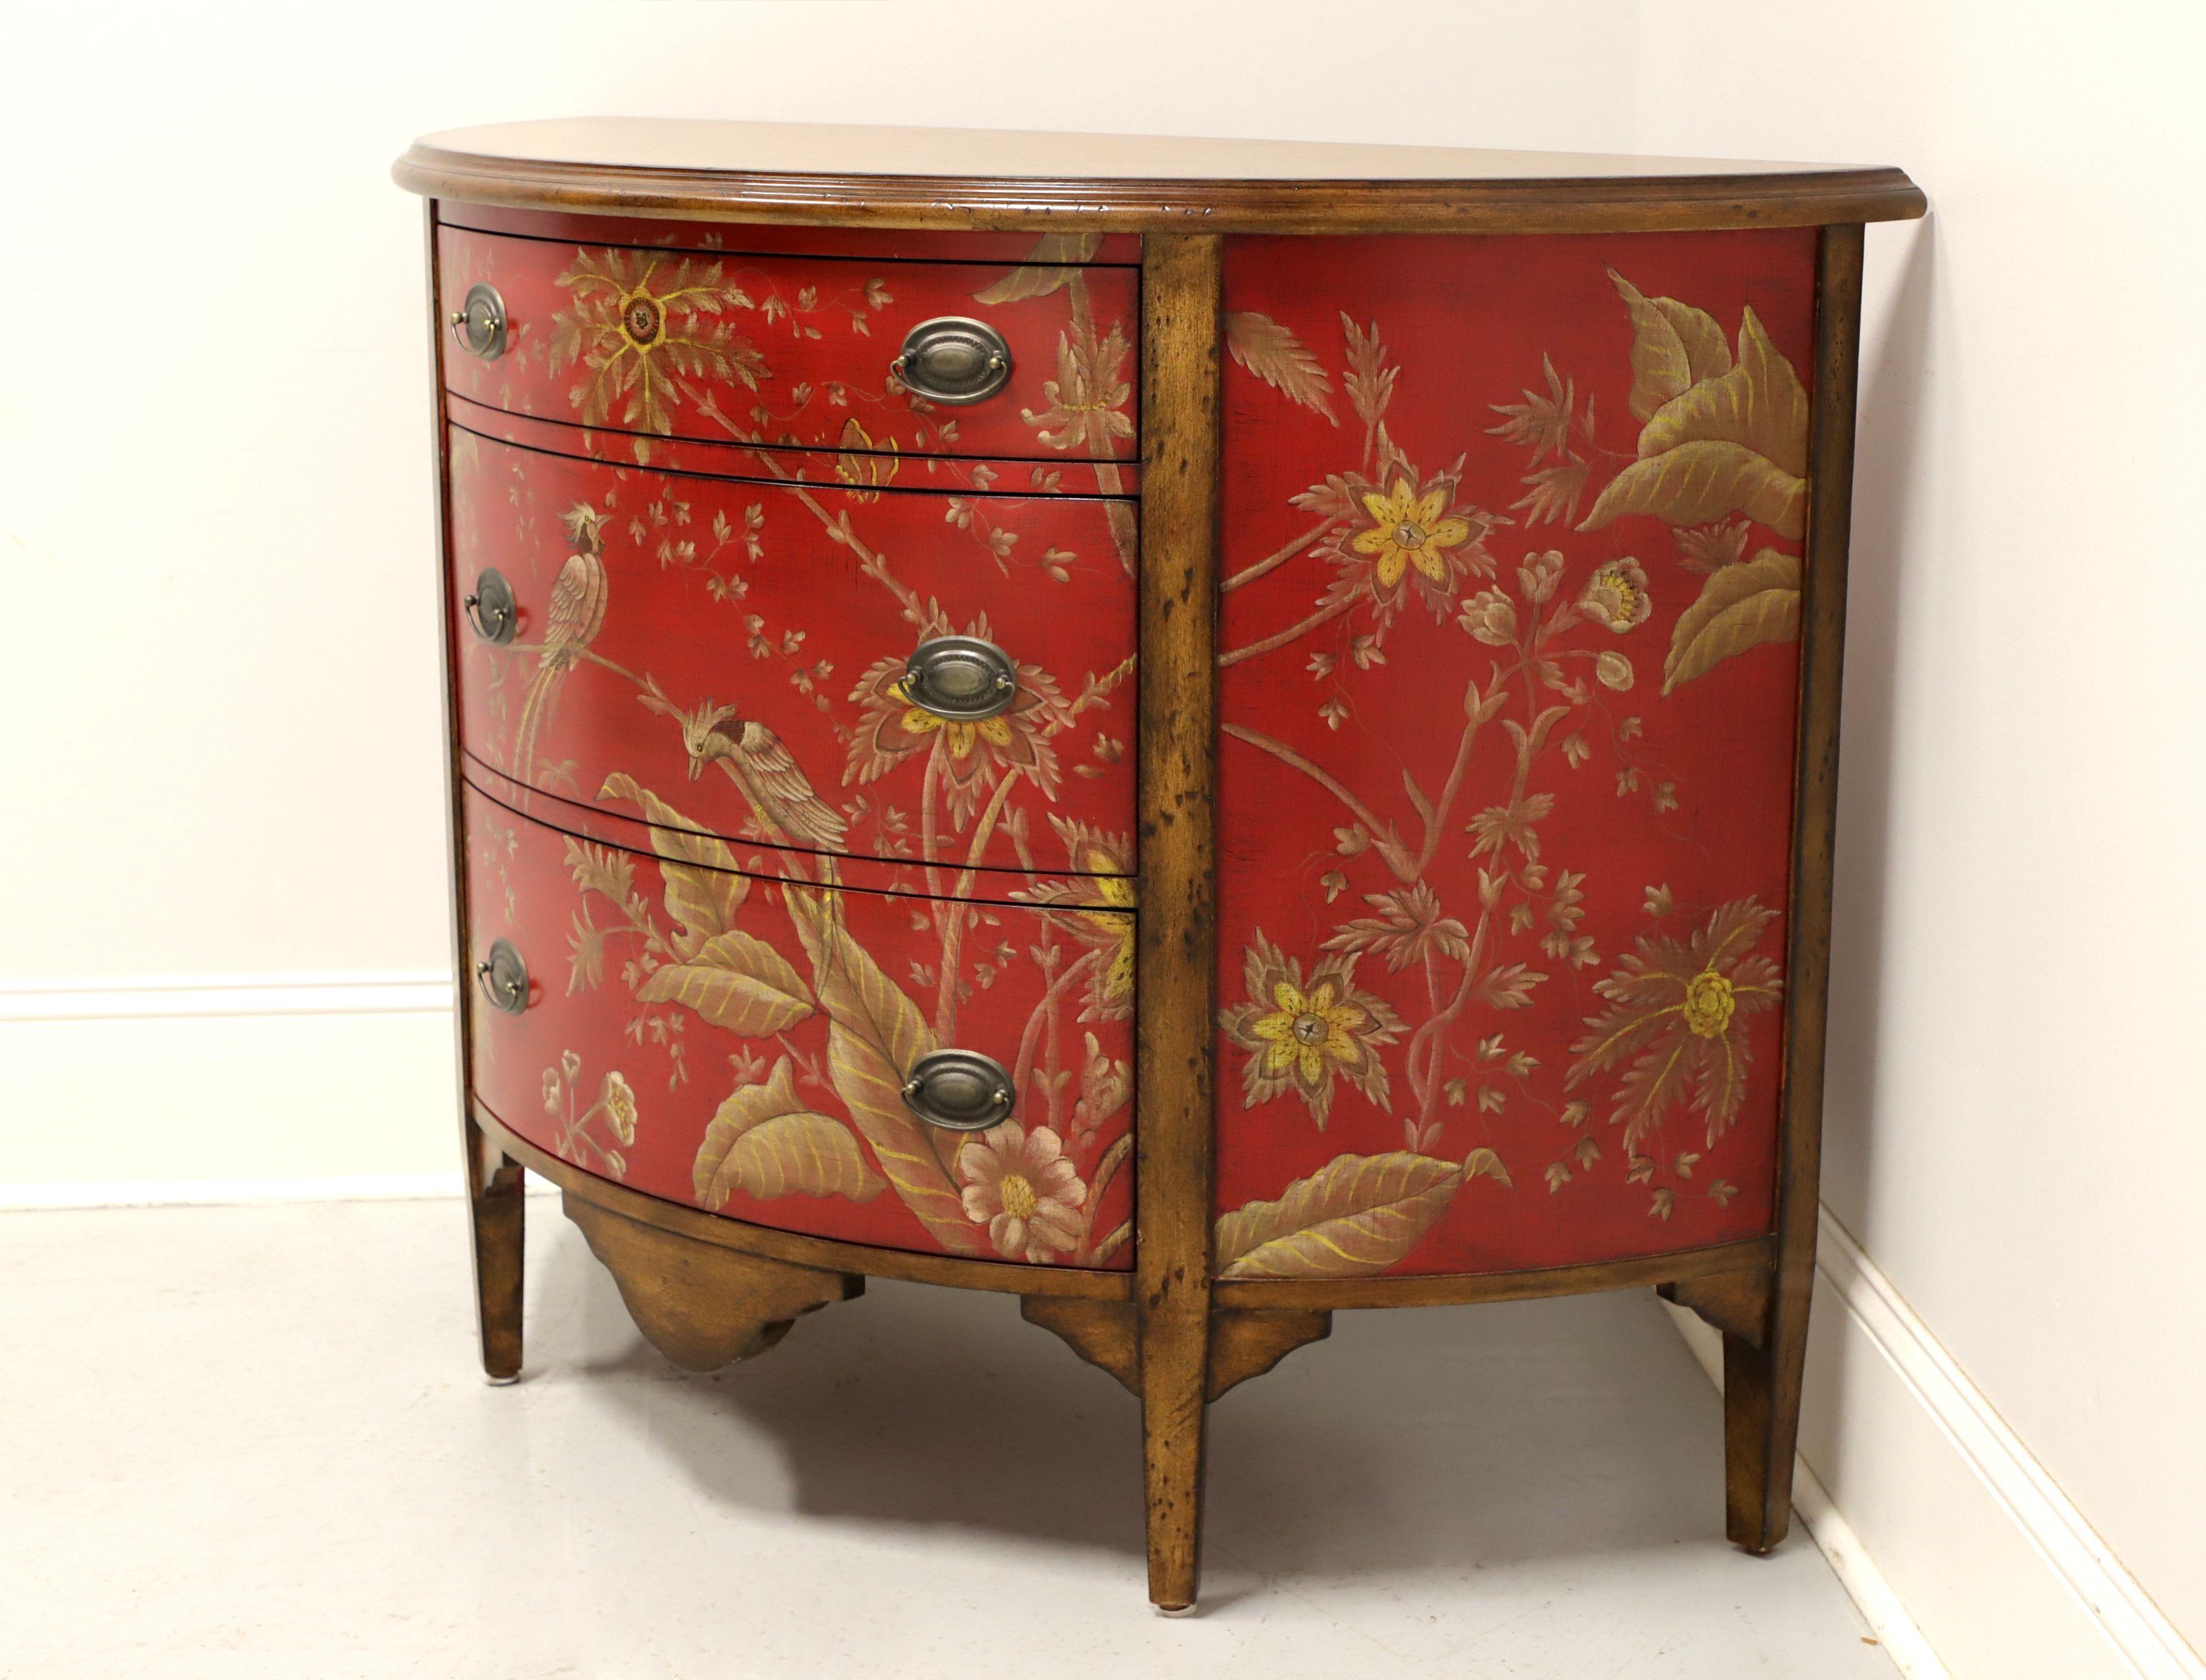 Modern Late 20th Century Red Painted with Foliate & Avian Themes Demilune Commode Chest